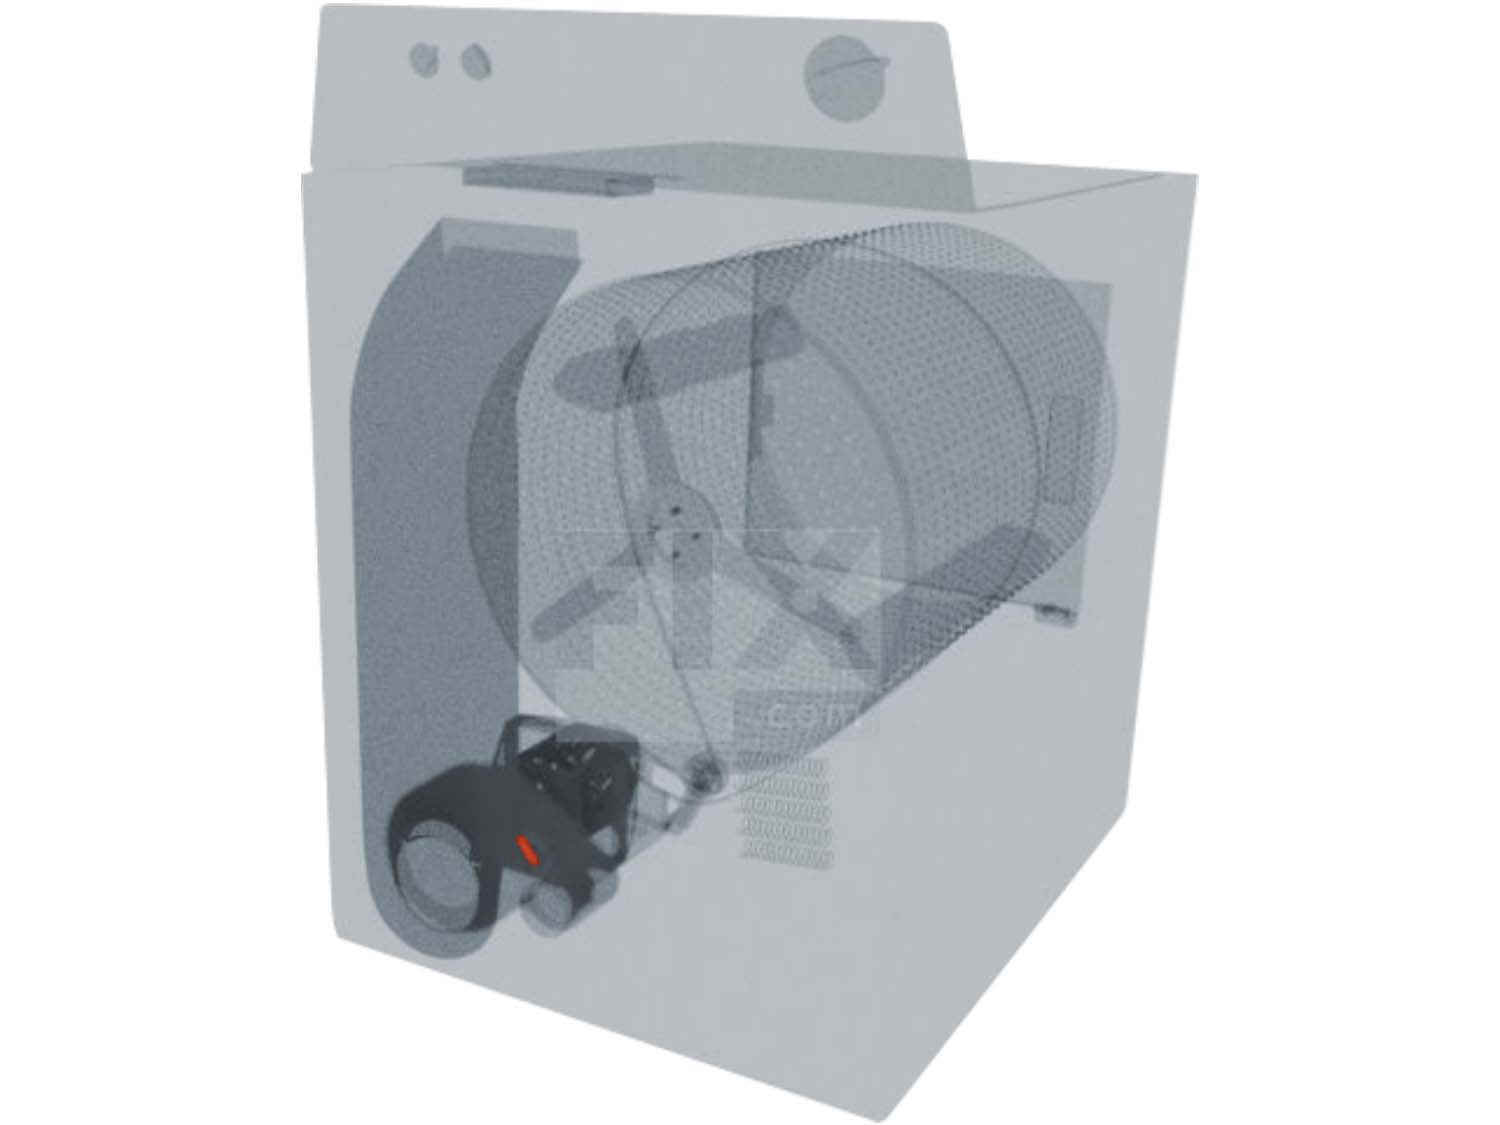 A 3D diagram showing the components of a dryer and specifying the location of the thermal fuse